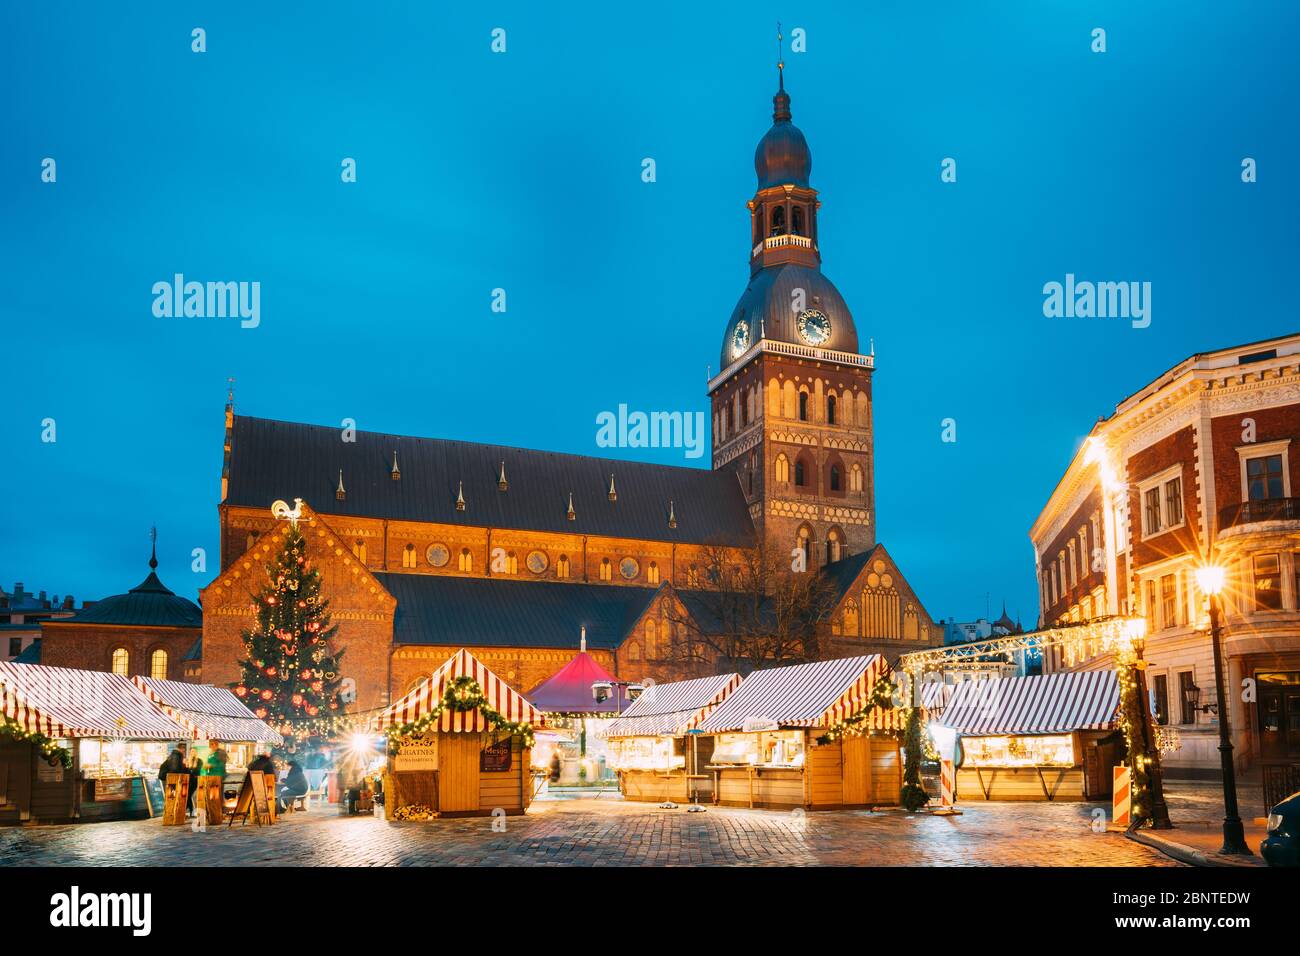 Riga, Latvia - December 13, 2016: Christmas Market On Dome Square With Riga Dome Cathedral. Christmas Tree And Trading Houses. Famous Landmark At Wint Stock Photo